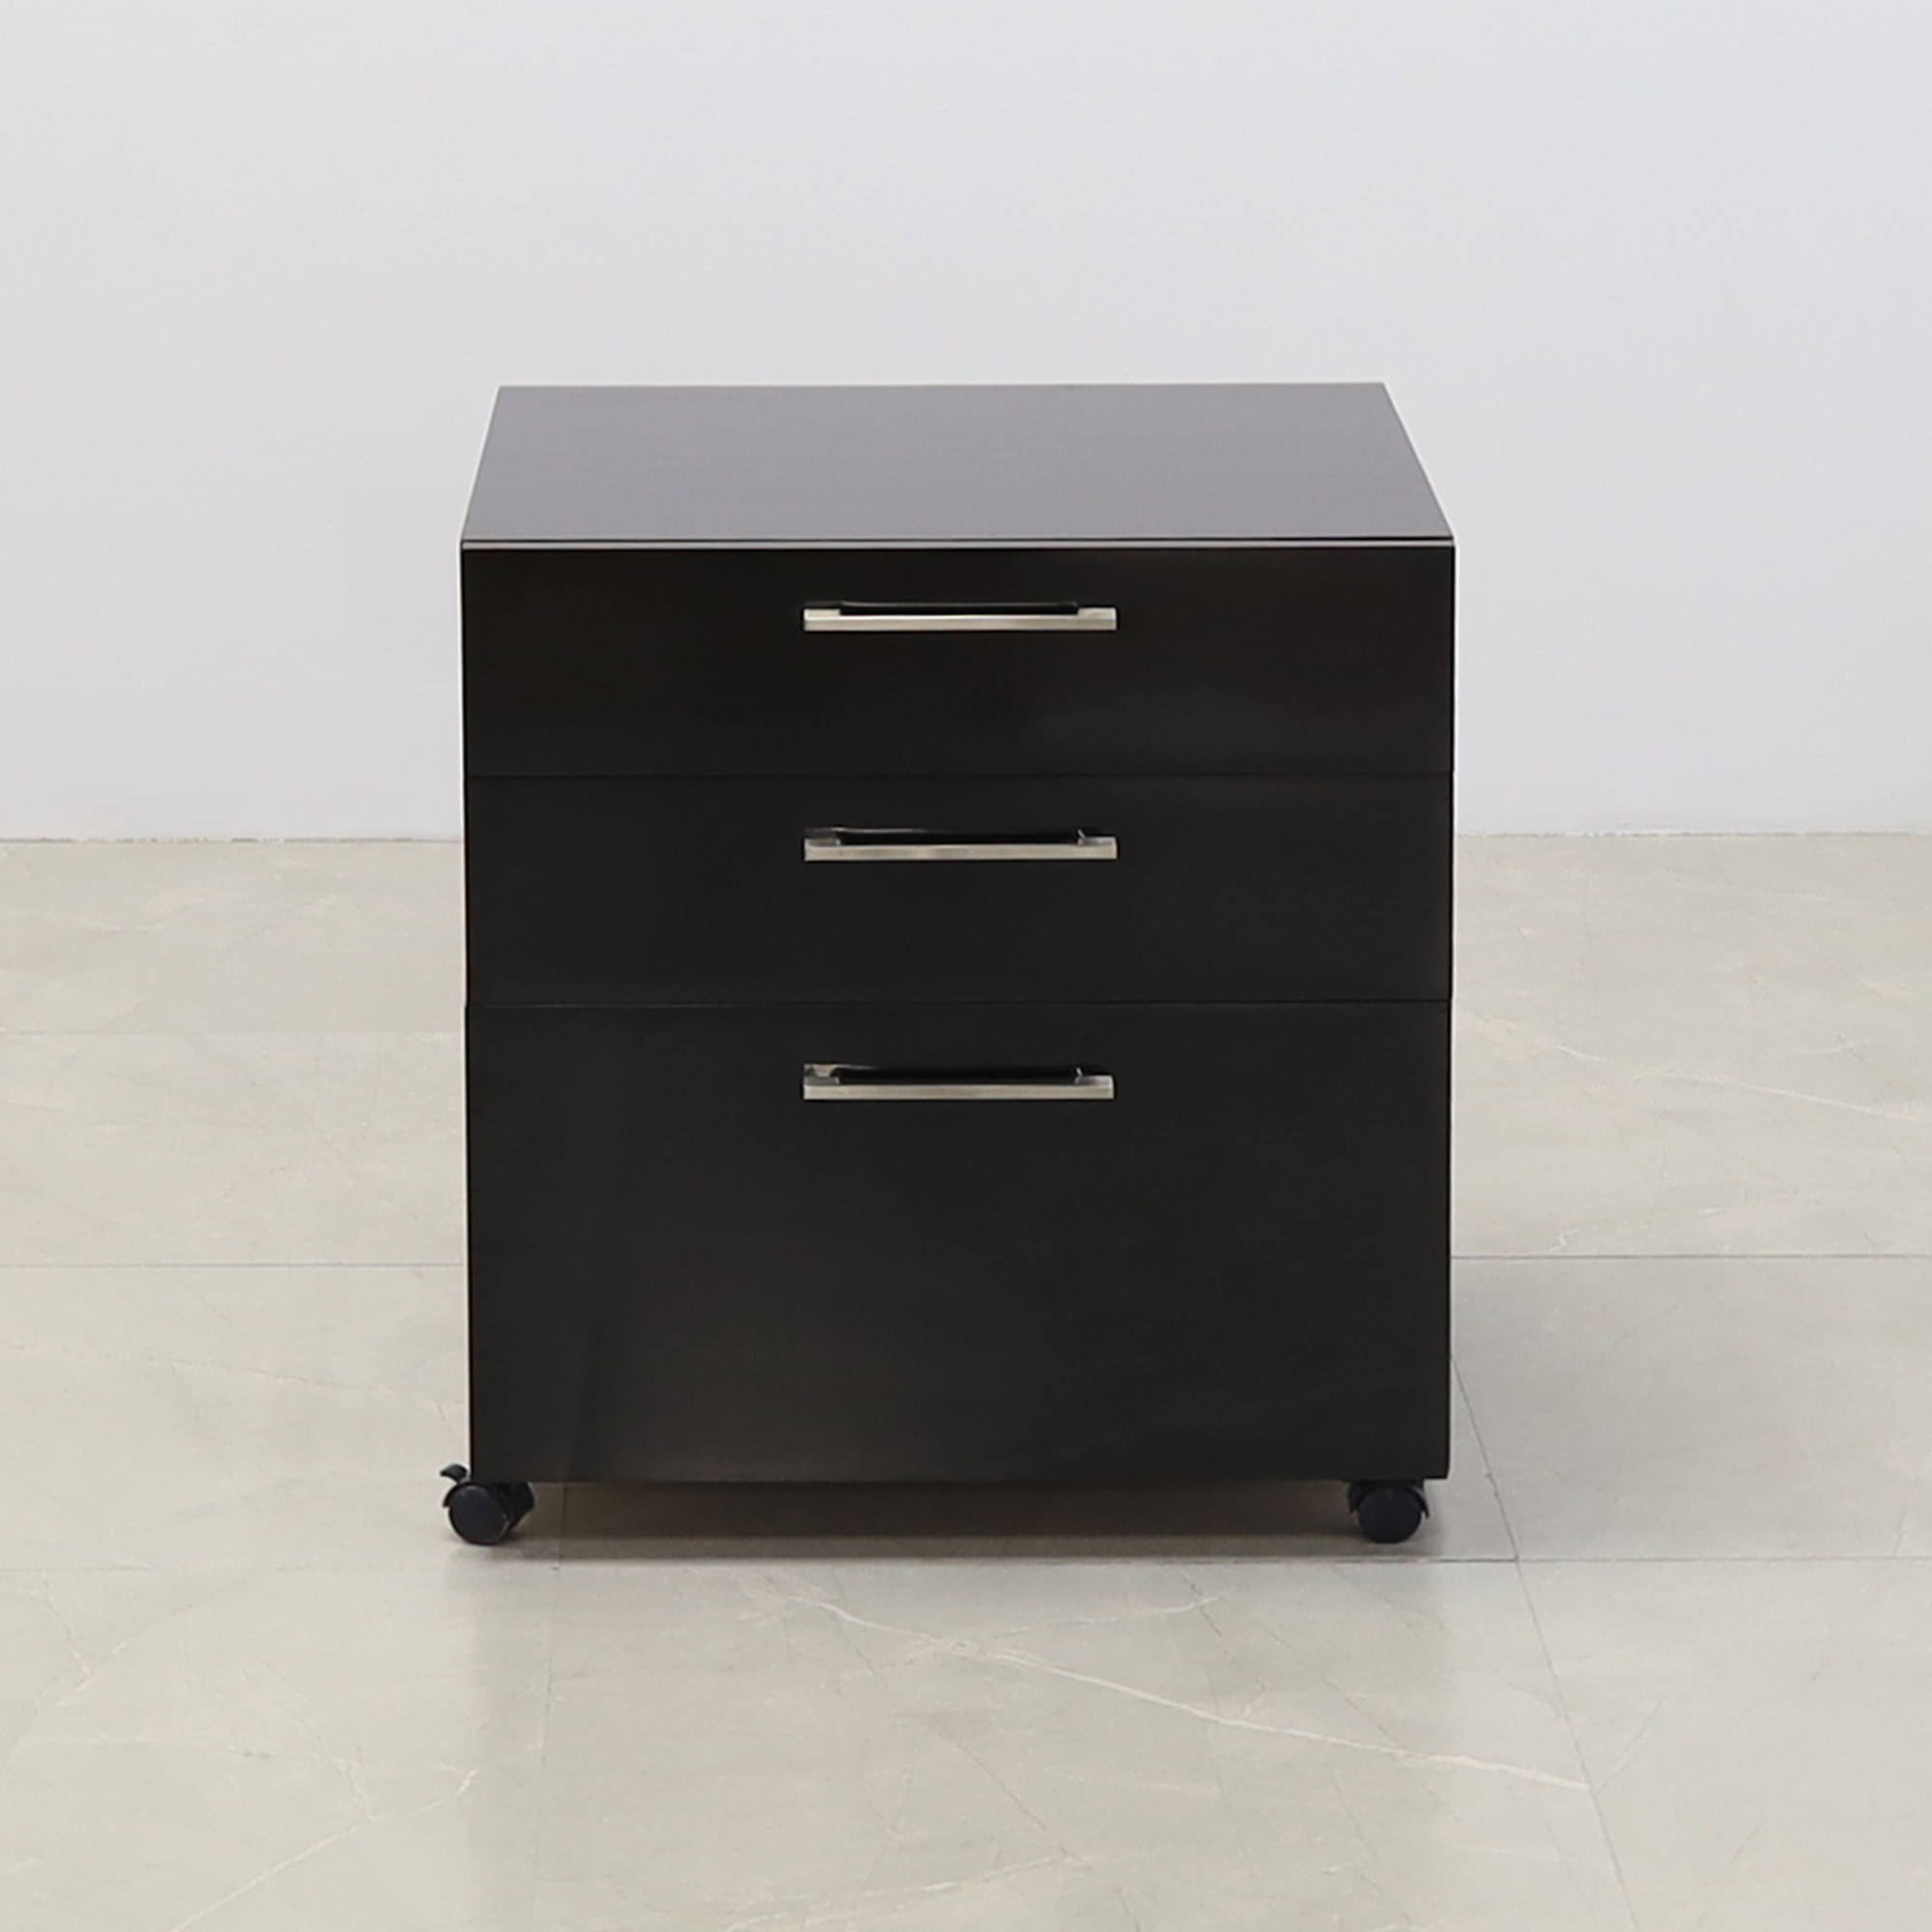 24 inches Naples Mobile Storage in black gloss laminate shown here.